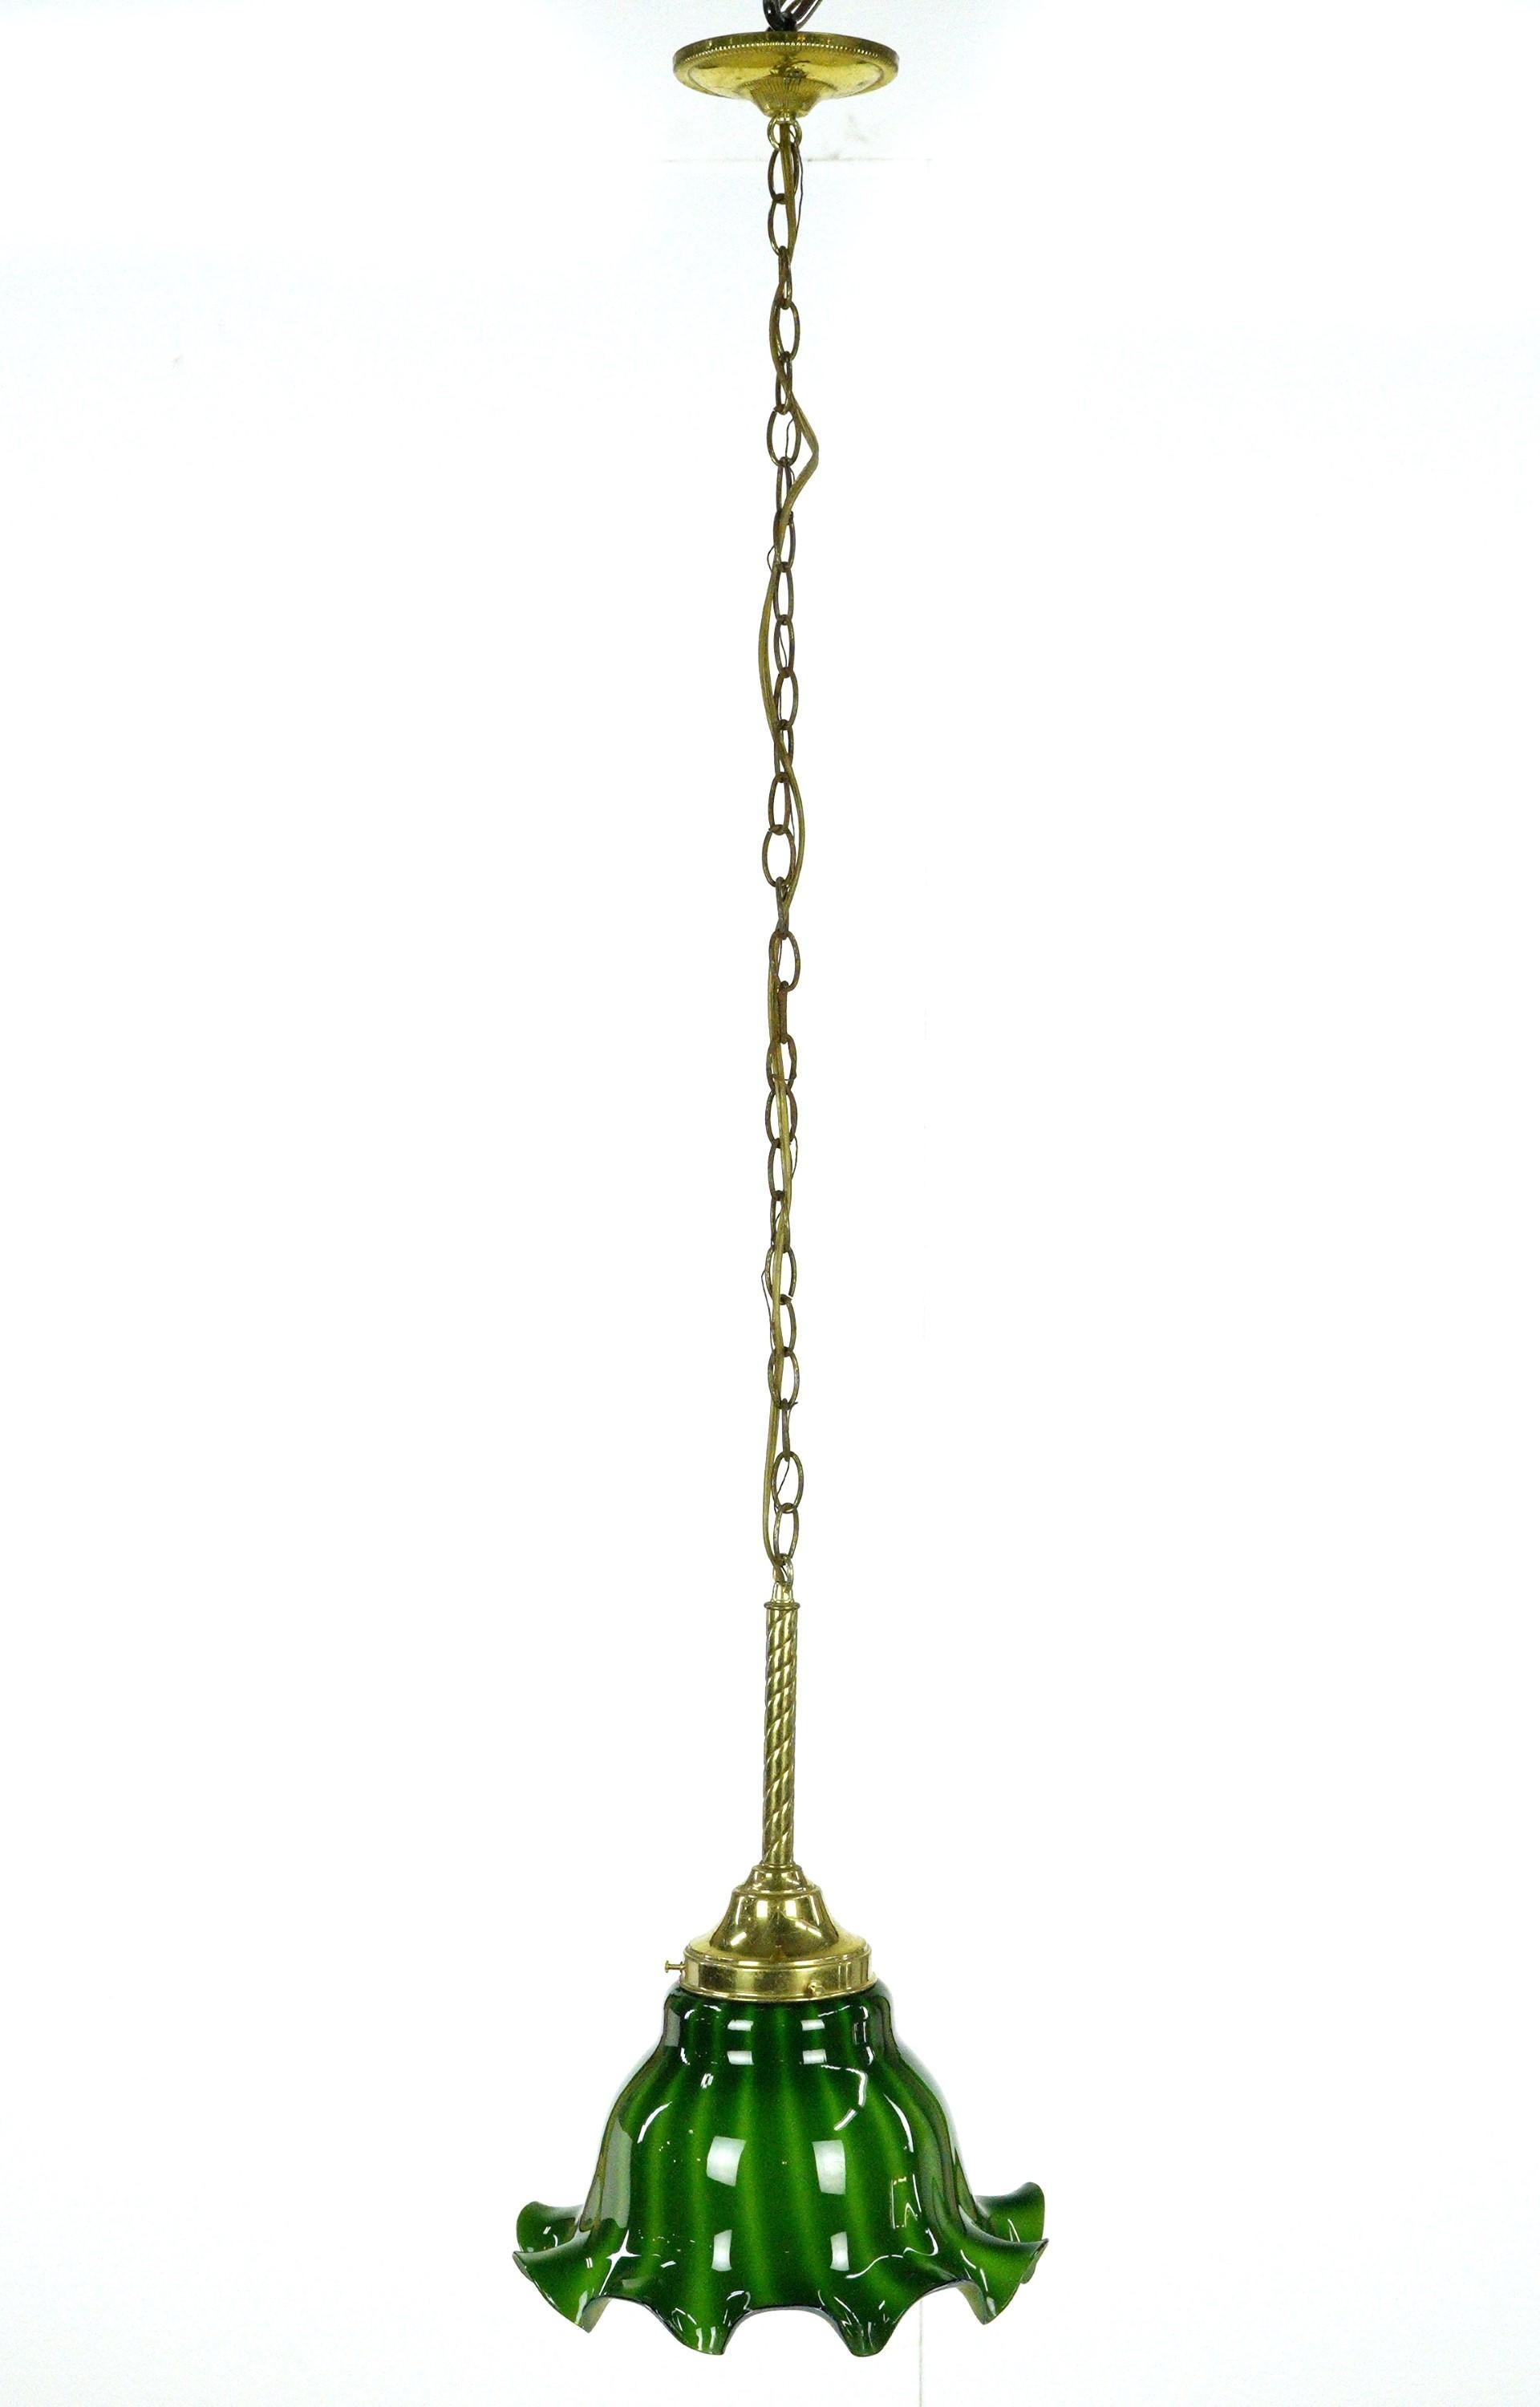 Pendant light with a ruffled green glass shade and a brass chain fitter. This requires one standard medium base bulb. The price includes restoration of cleaning and rewiring. Good condition with appropriate wear from age. One available. Cleaned and